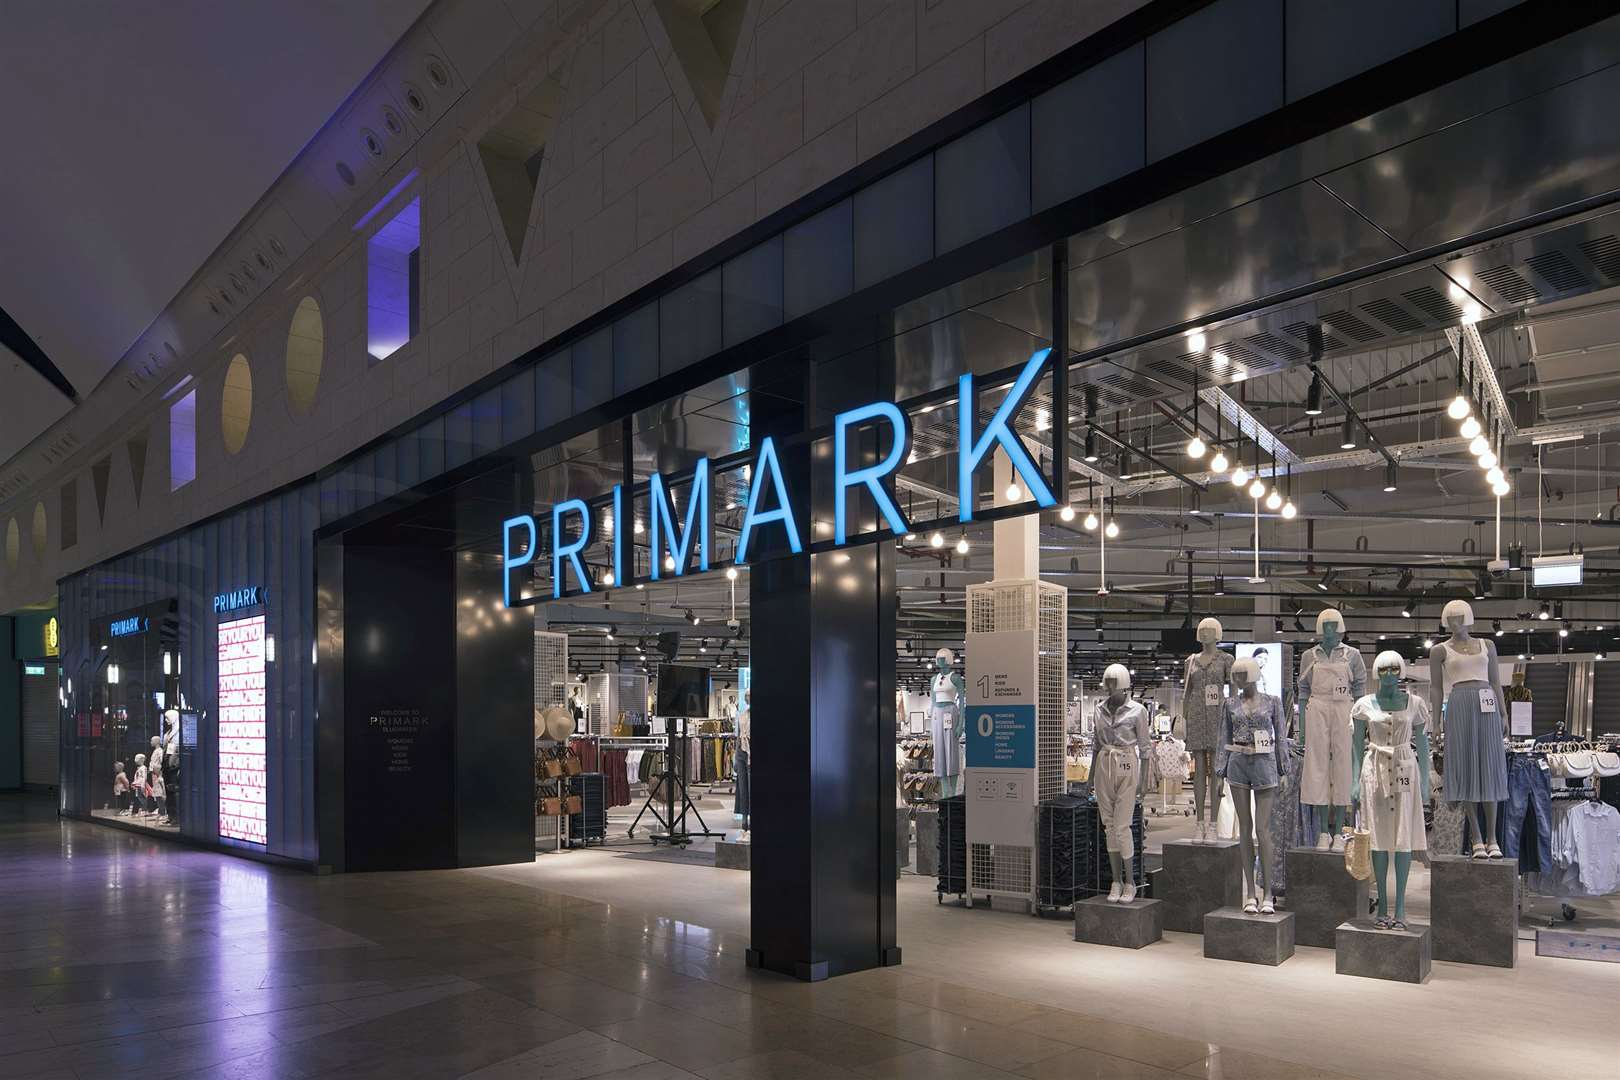 A man was arrested at Bluewater after upskirting women at the Primark store. Picture: Primark